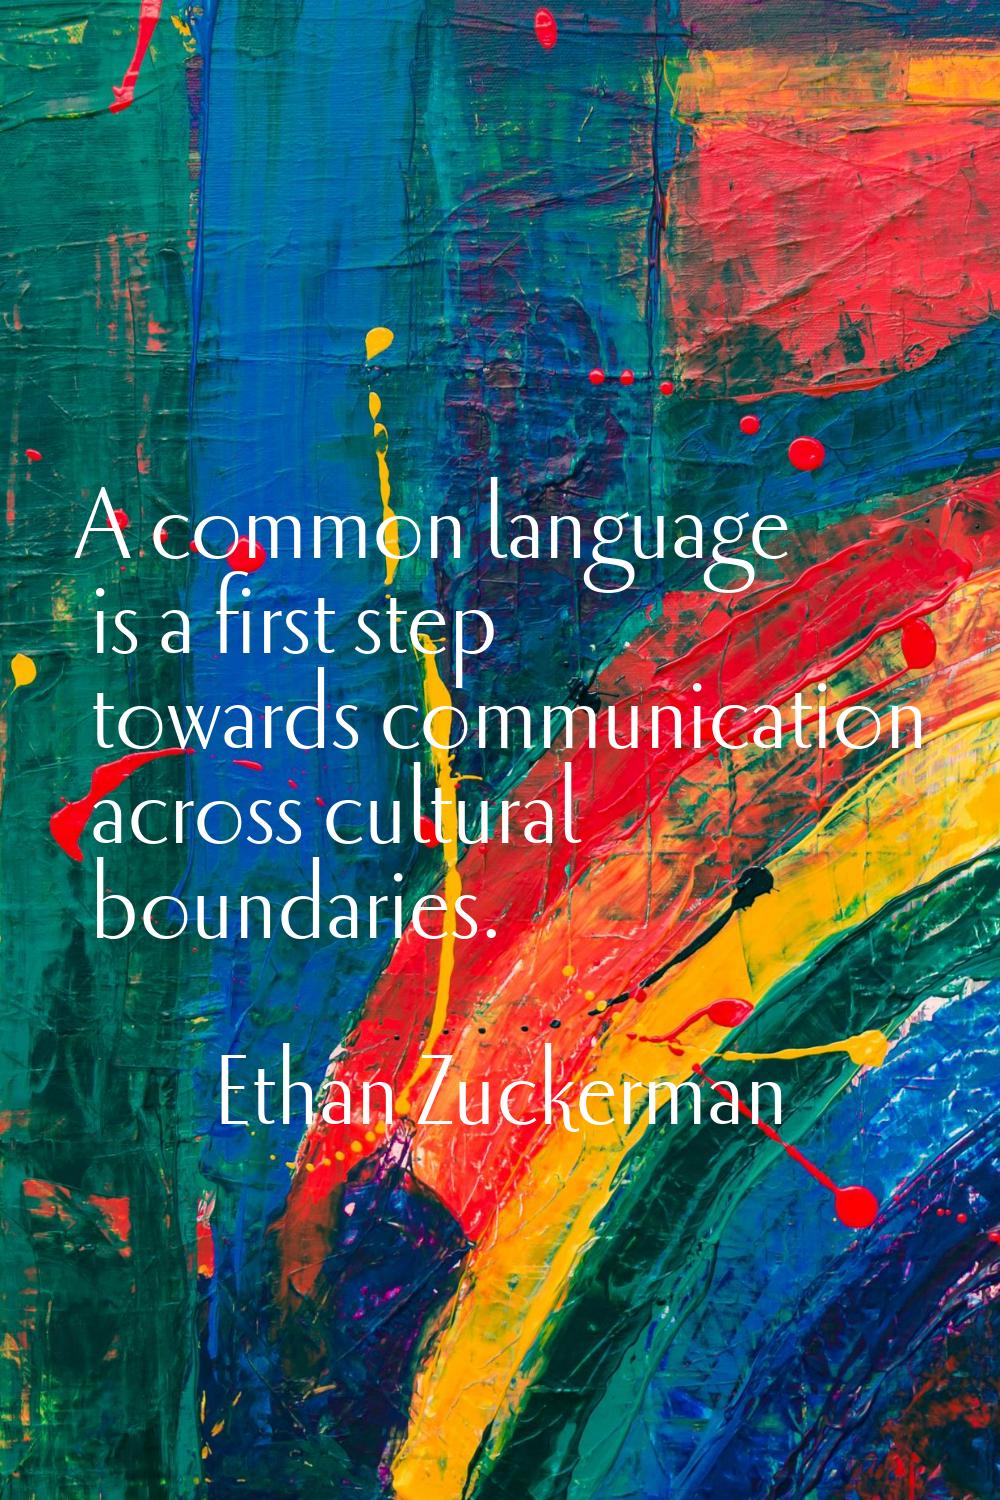 A common language is a first step towards communication across cultural boundaries.